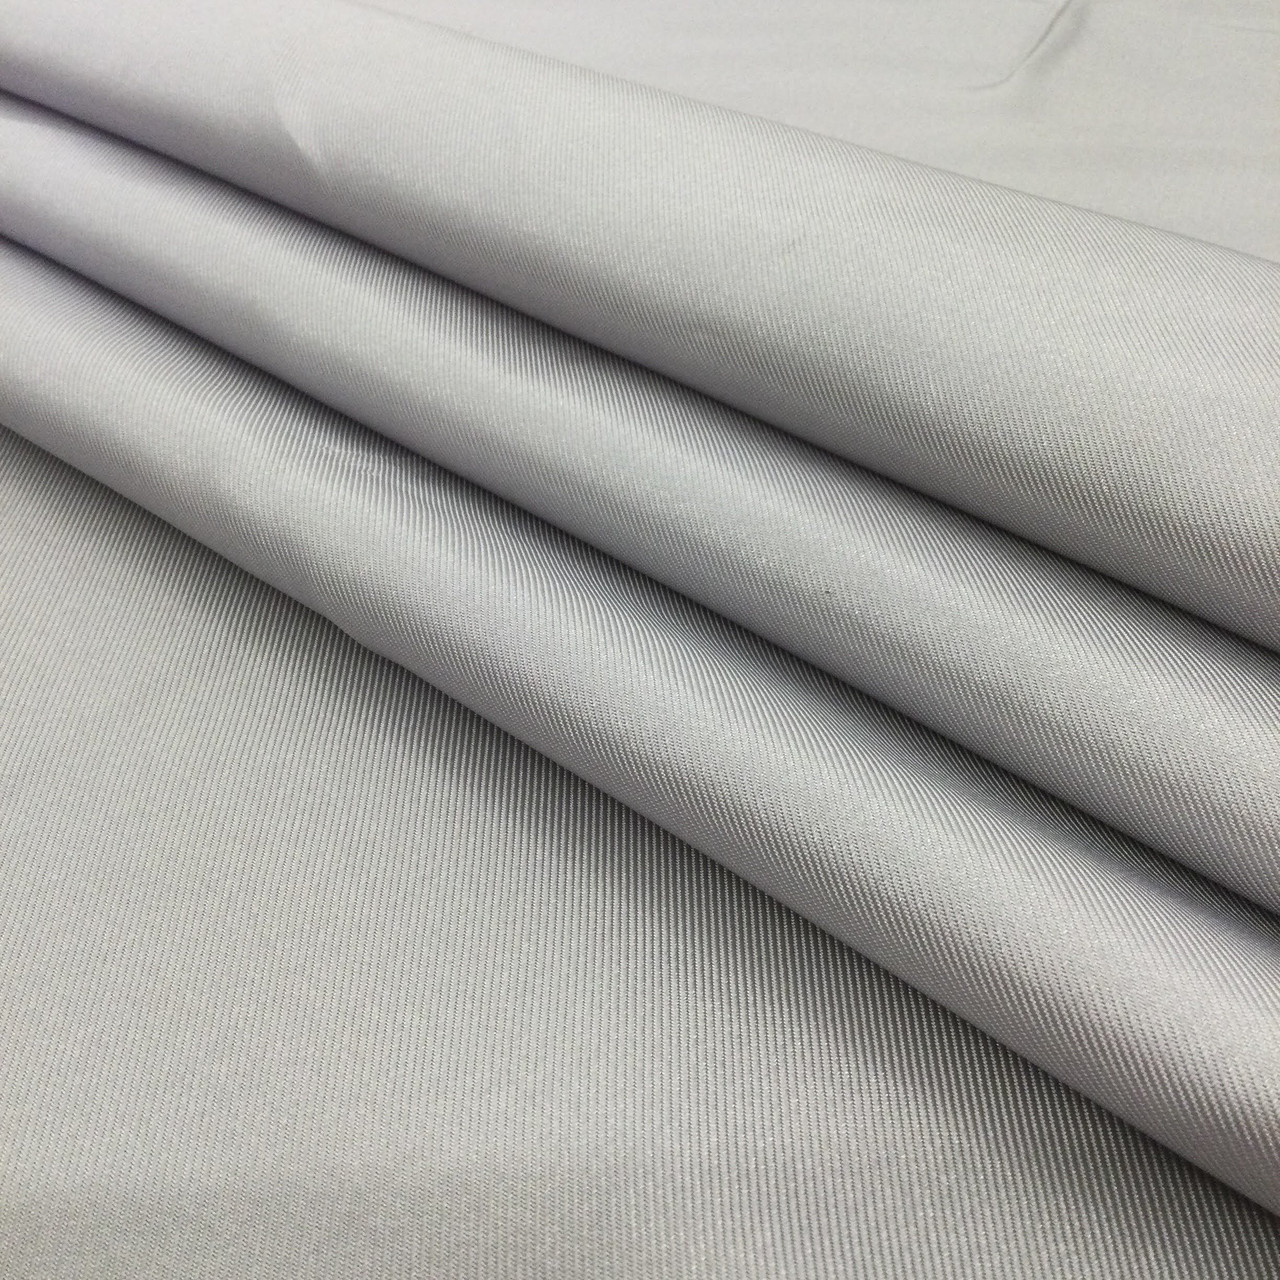 Polyester Stretch Lining. 150cm wide. Champaign.